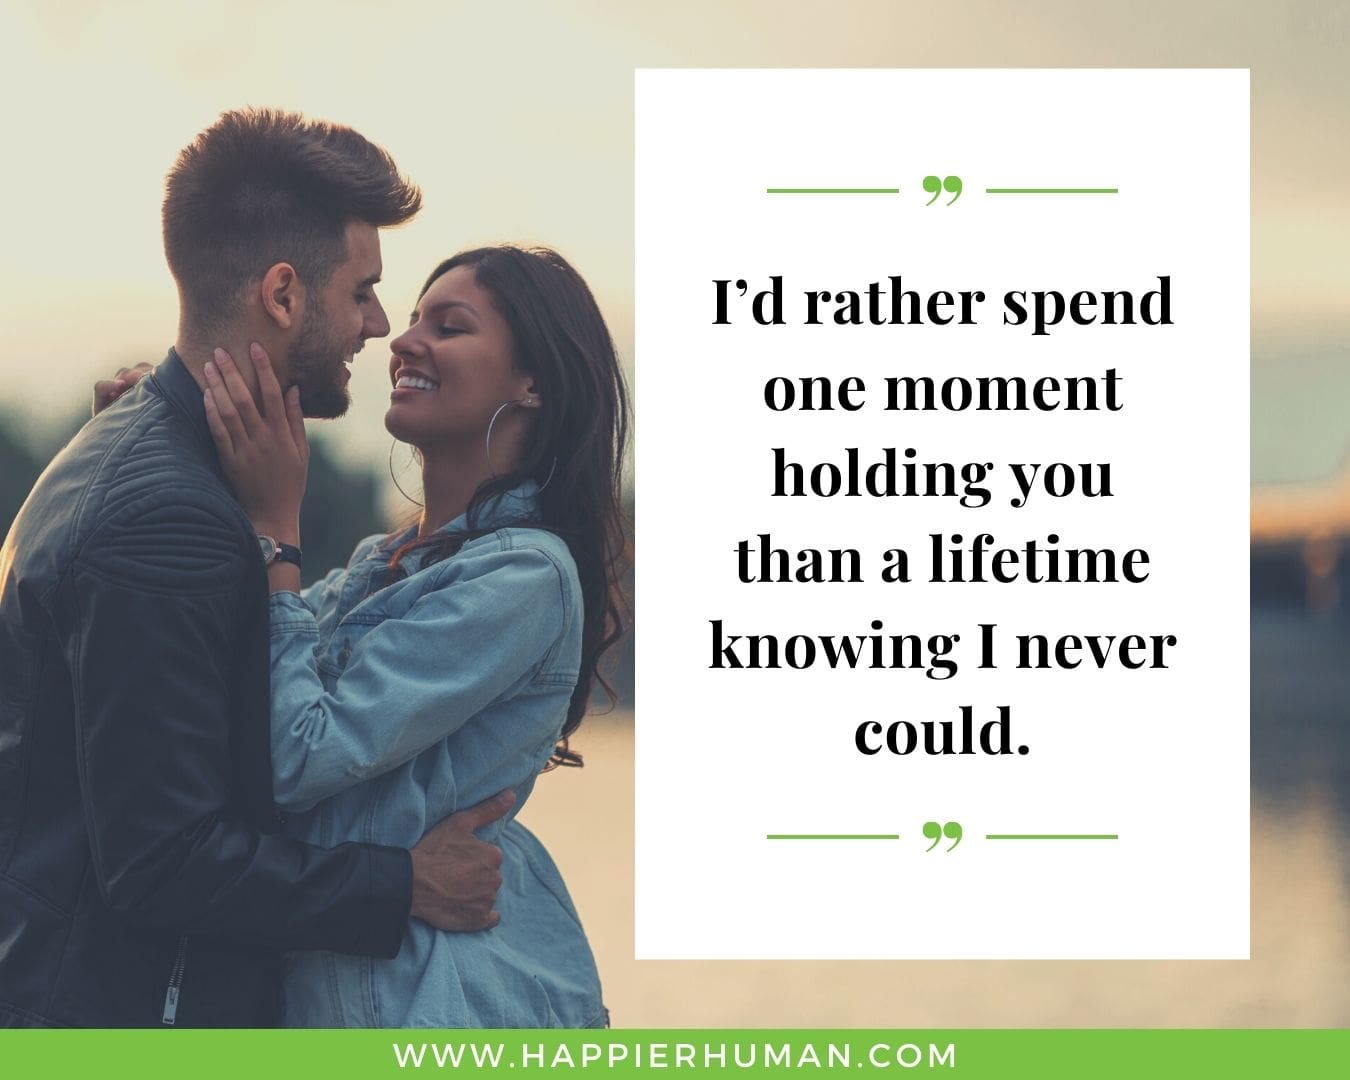 Lifetime of Love Quotes for Her - “I’d rather spend one moment holding you than a lifetime knowing I never could.”